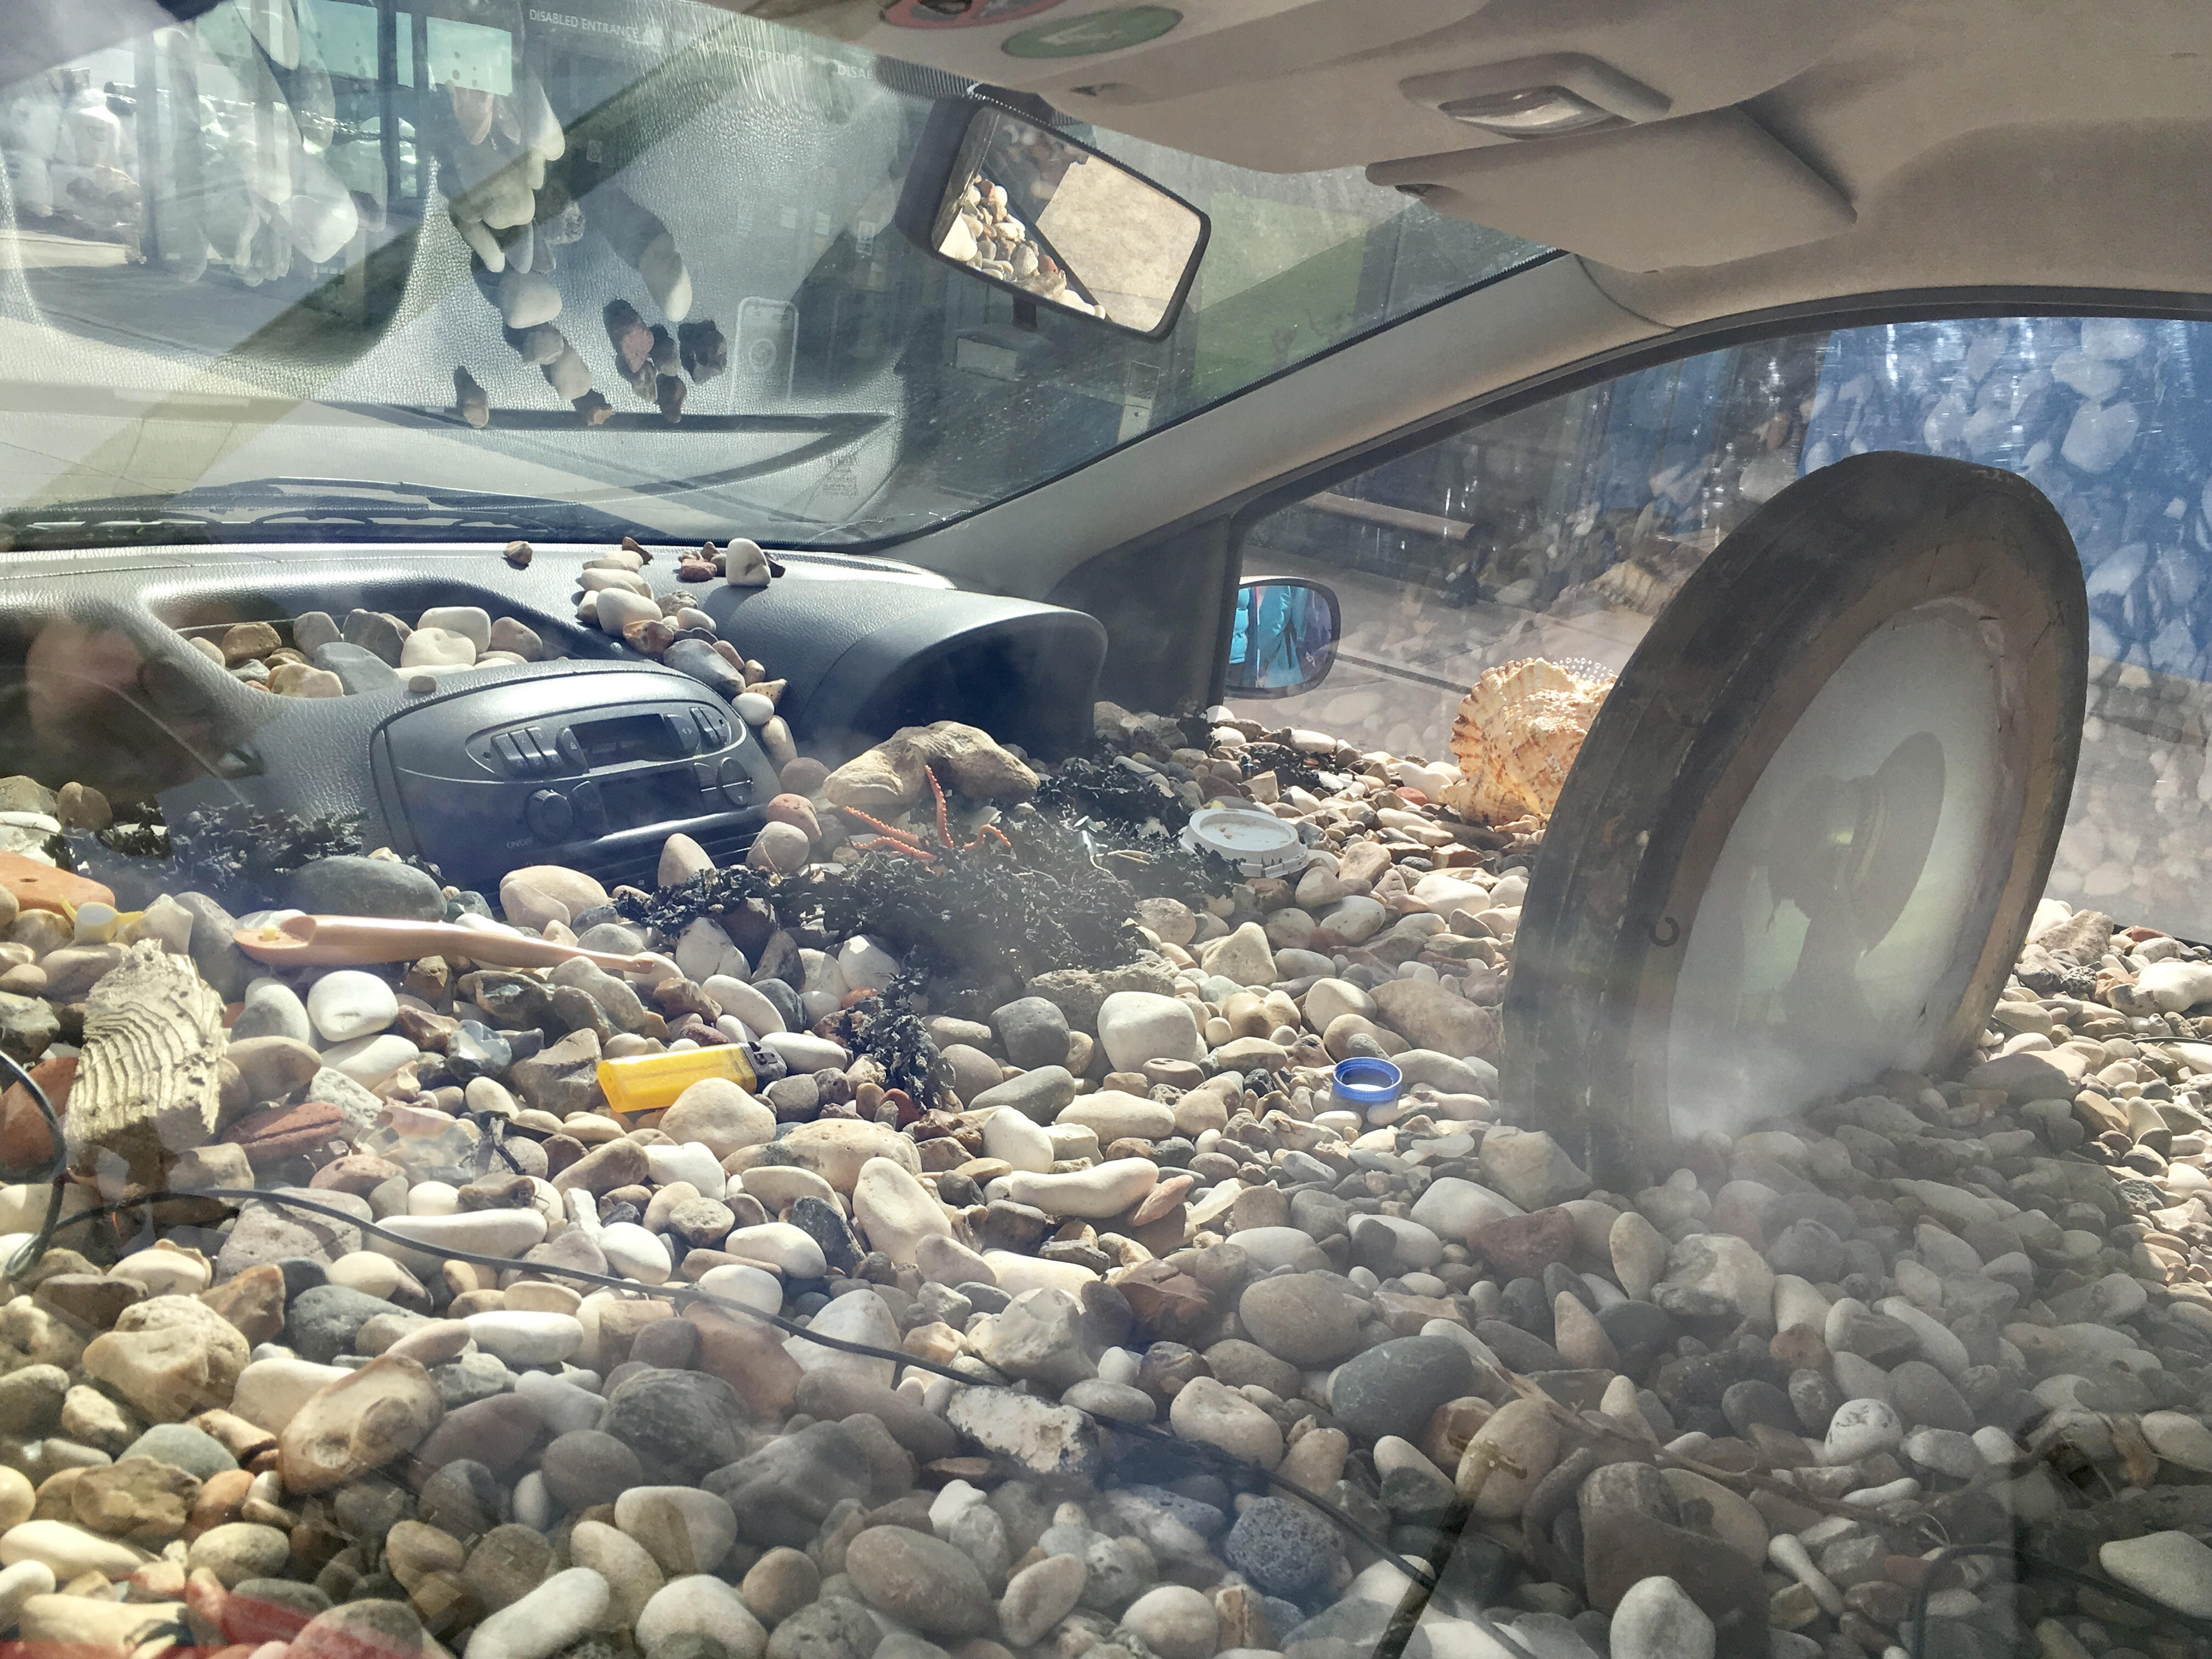 A view of the interior of a car filled with pebbles and shells.